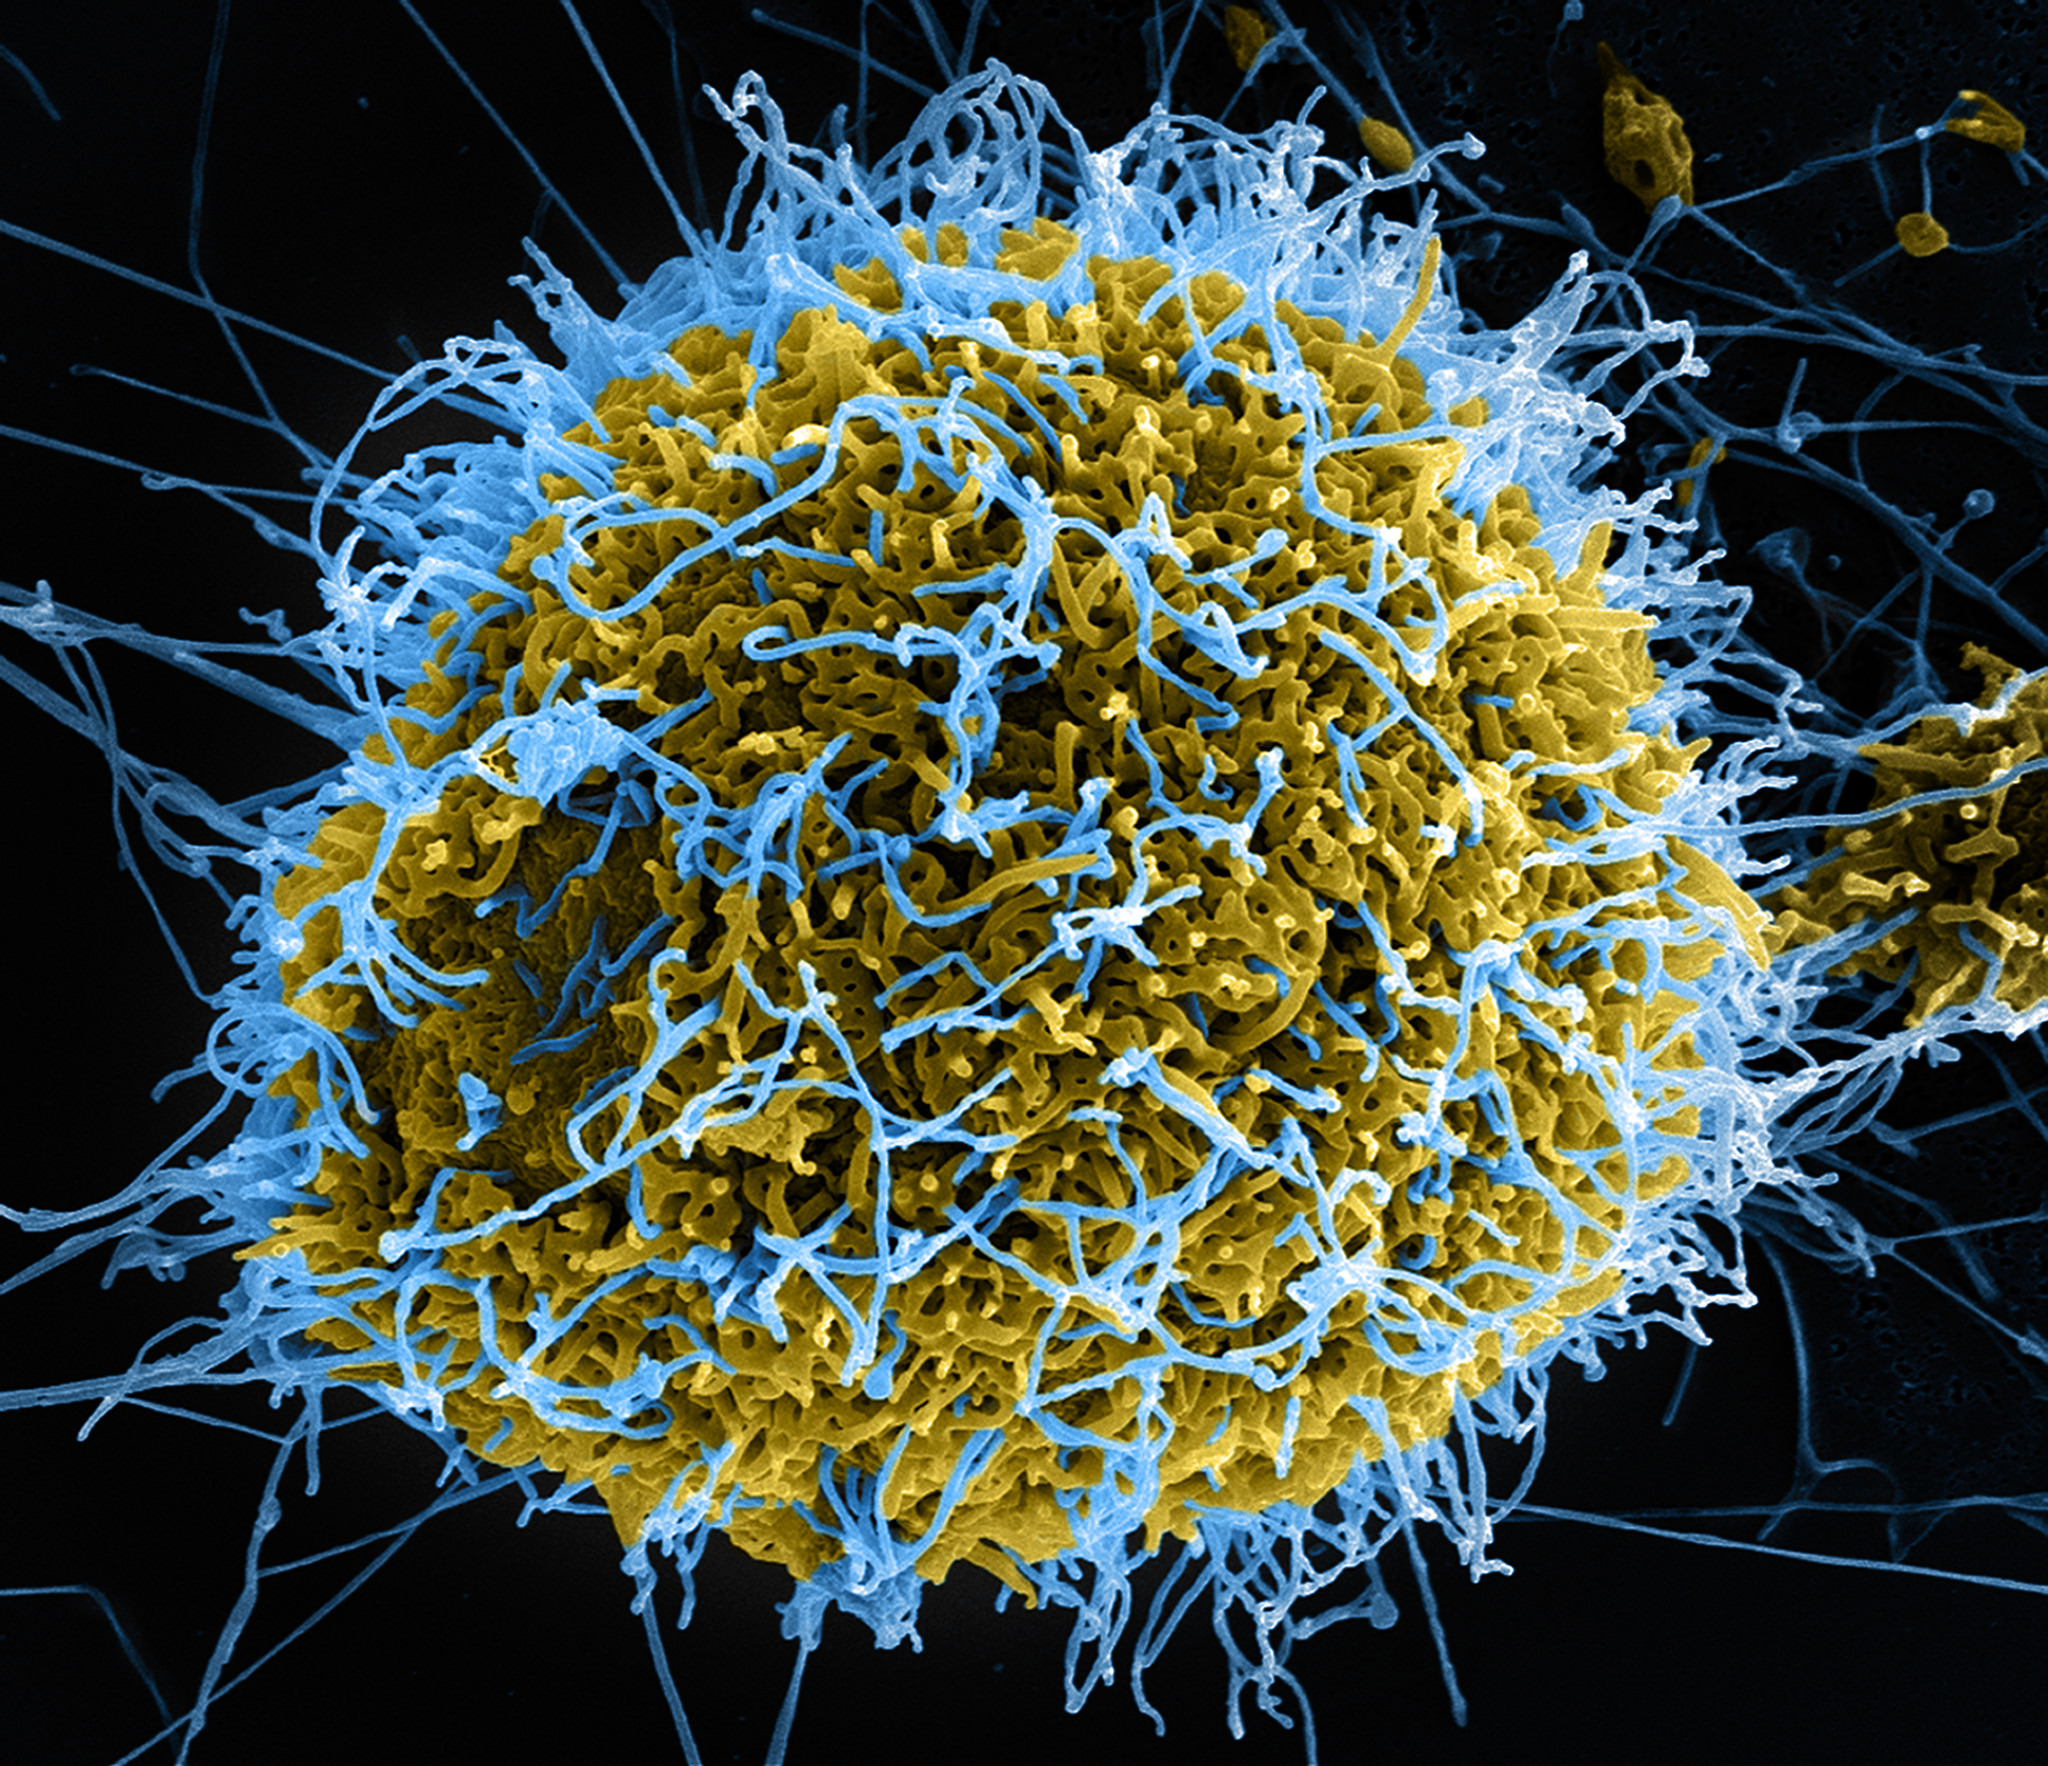 Ebola Virus Particles by NIAID